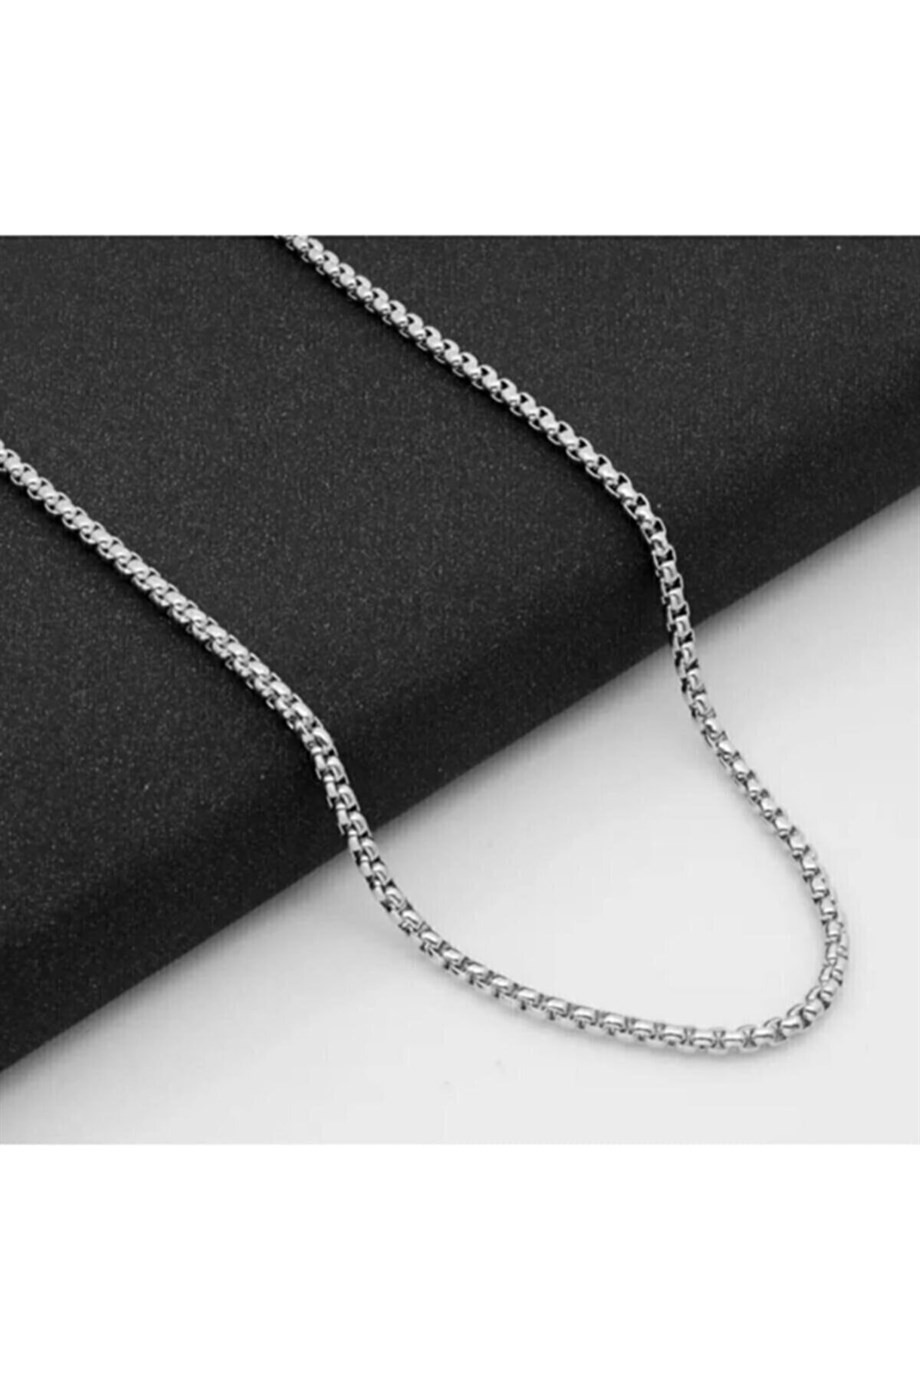 Men's gray knitted model chain necklace 60 cm